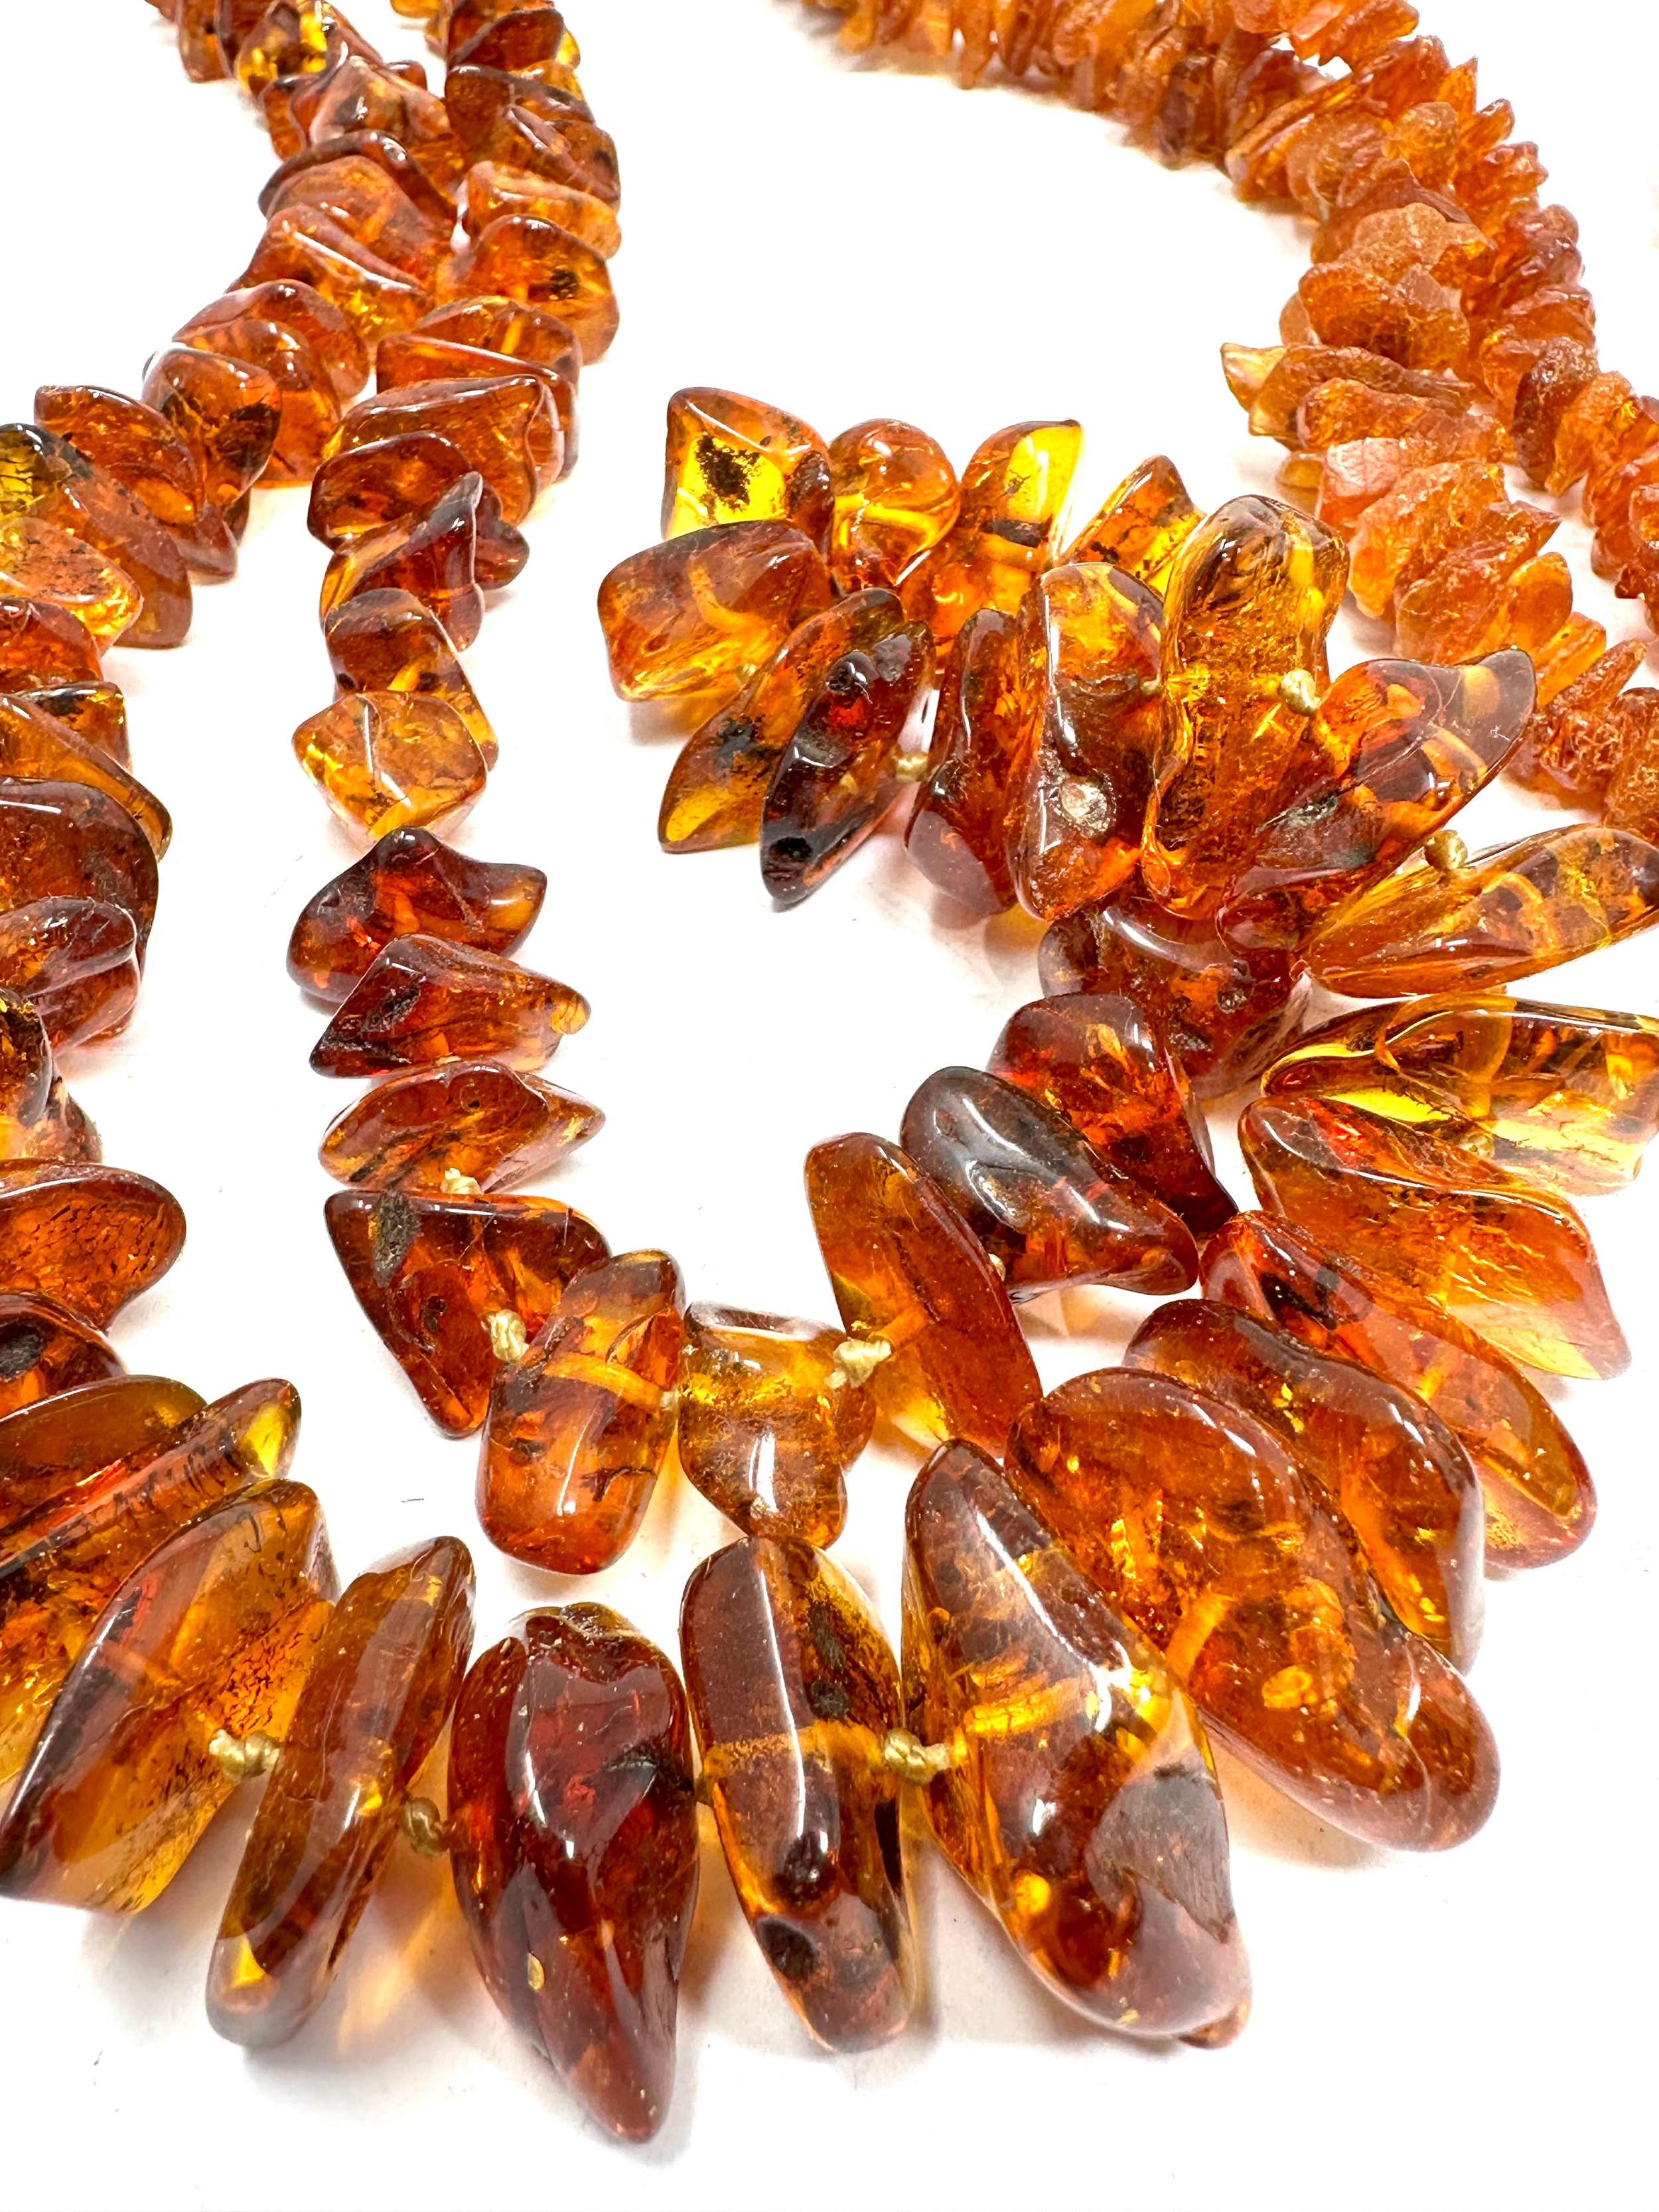 Vintage amber necklaces weight 139g - Image 2 of 3